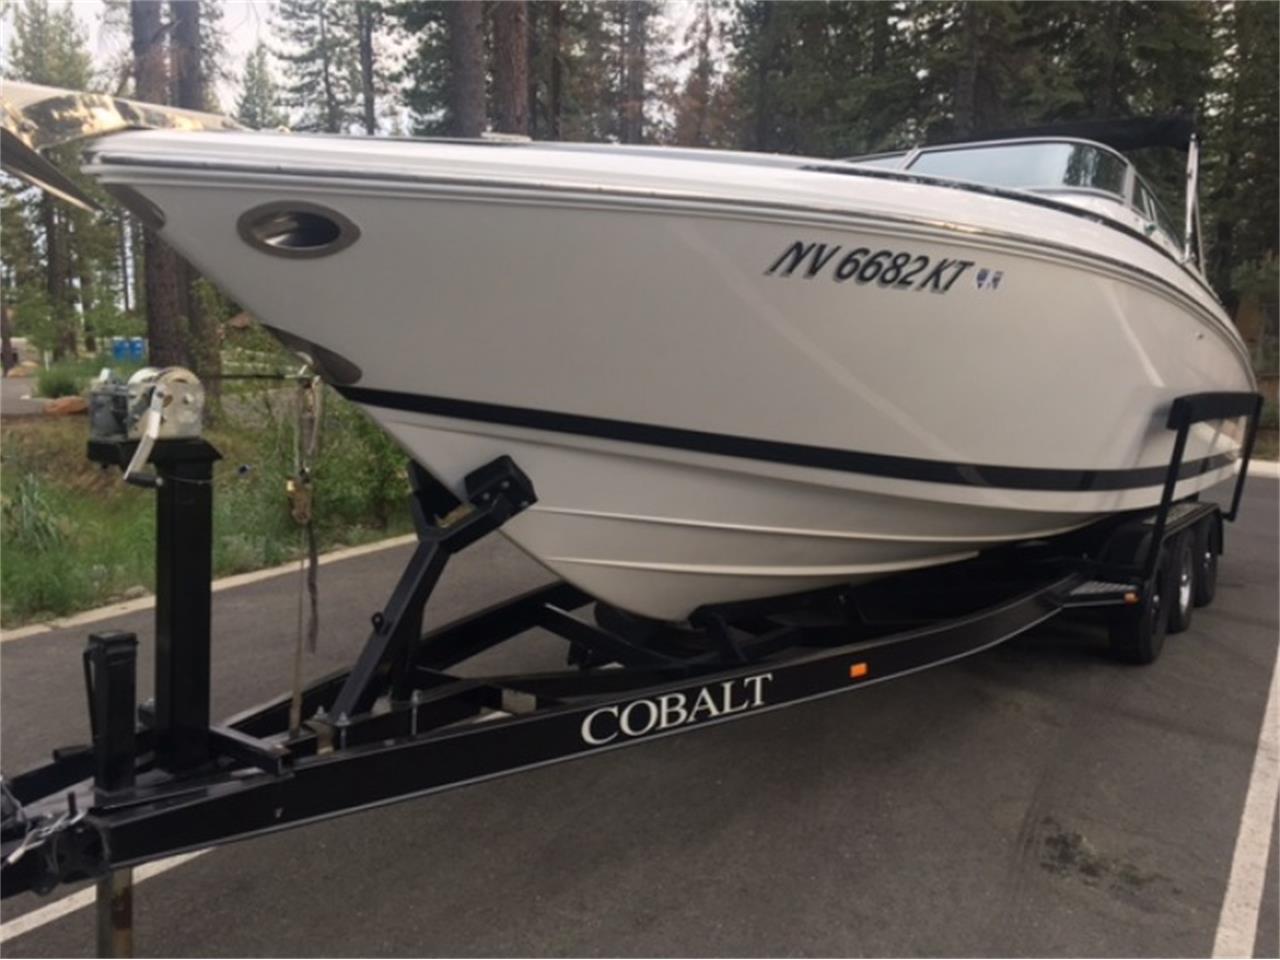 cobalt boats for sale in houston texas